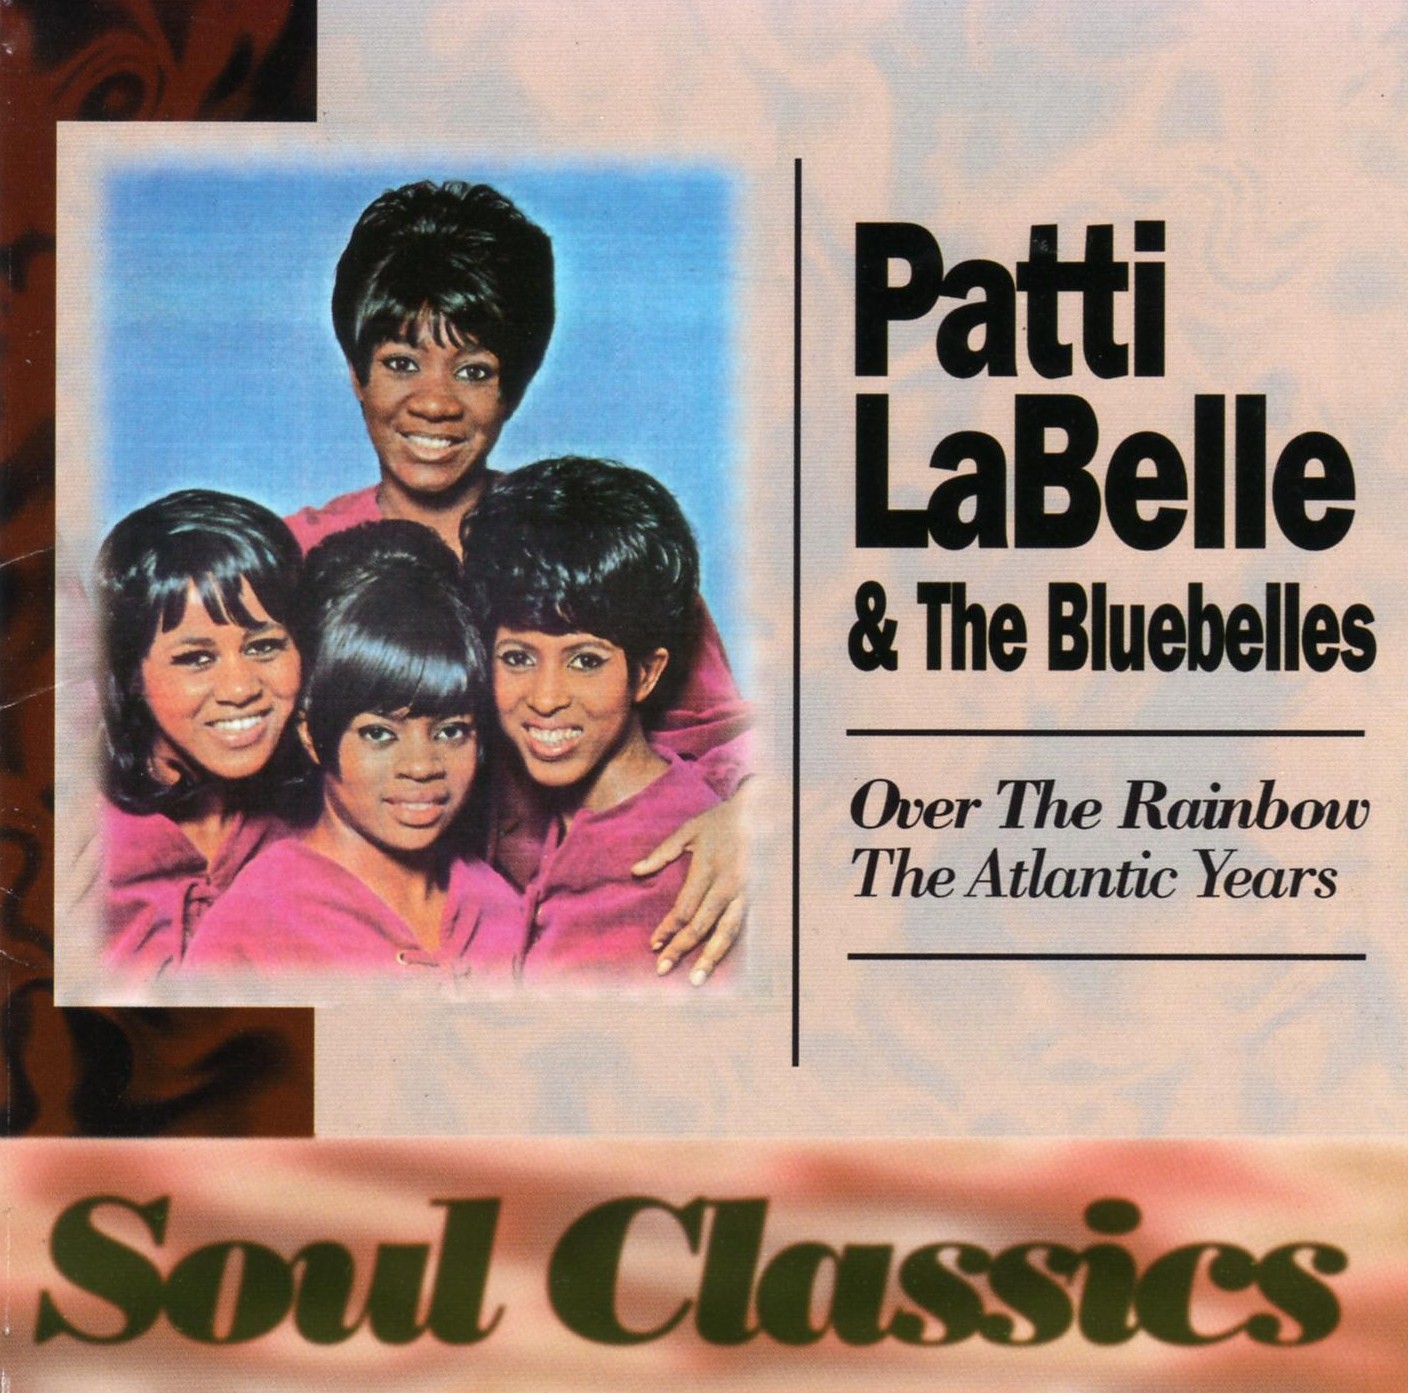 Over the rainbow mac and cheese patti labelle